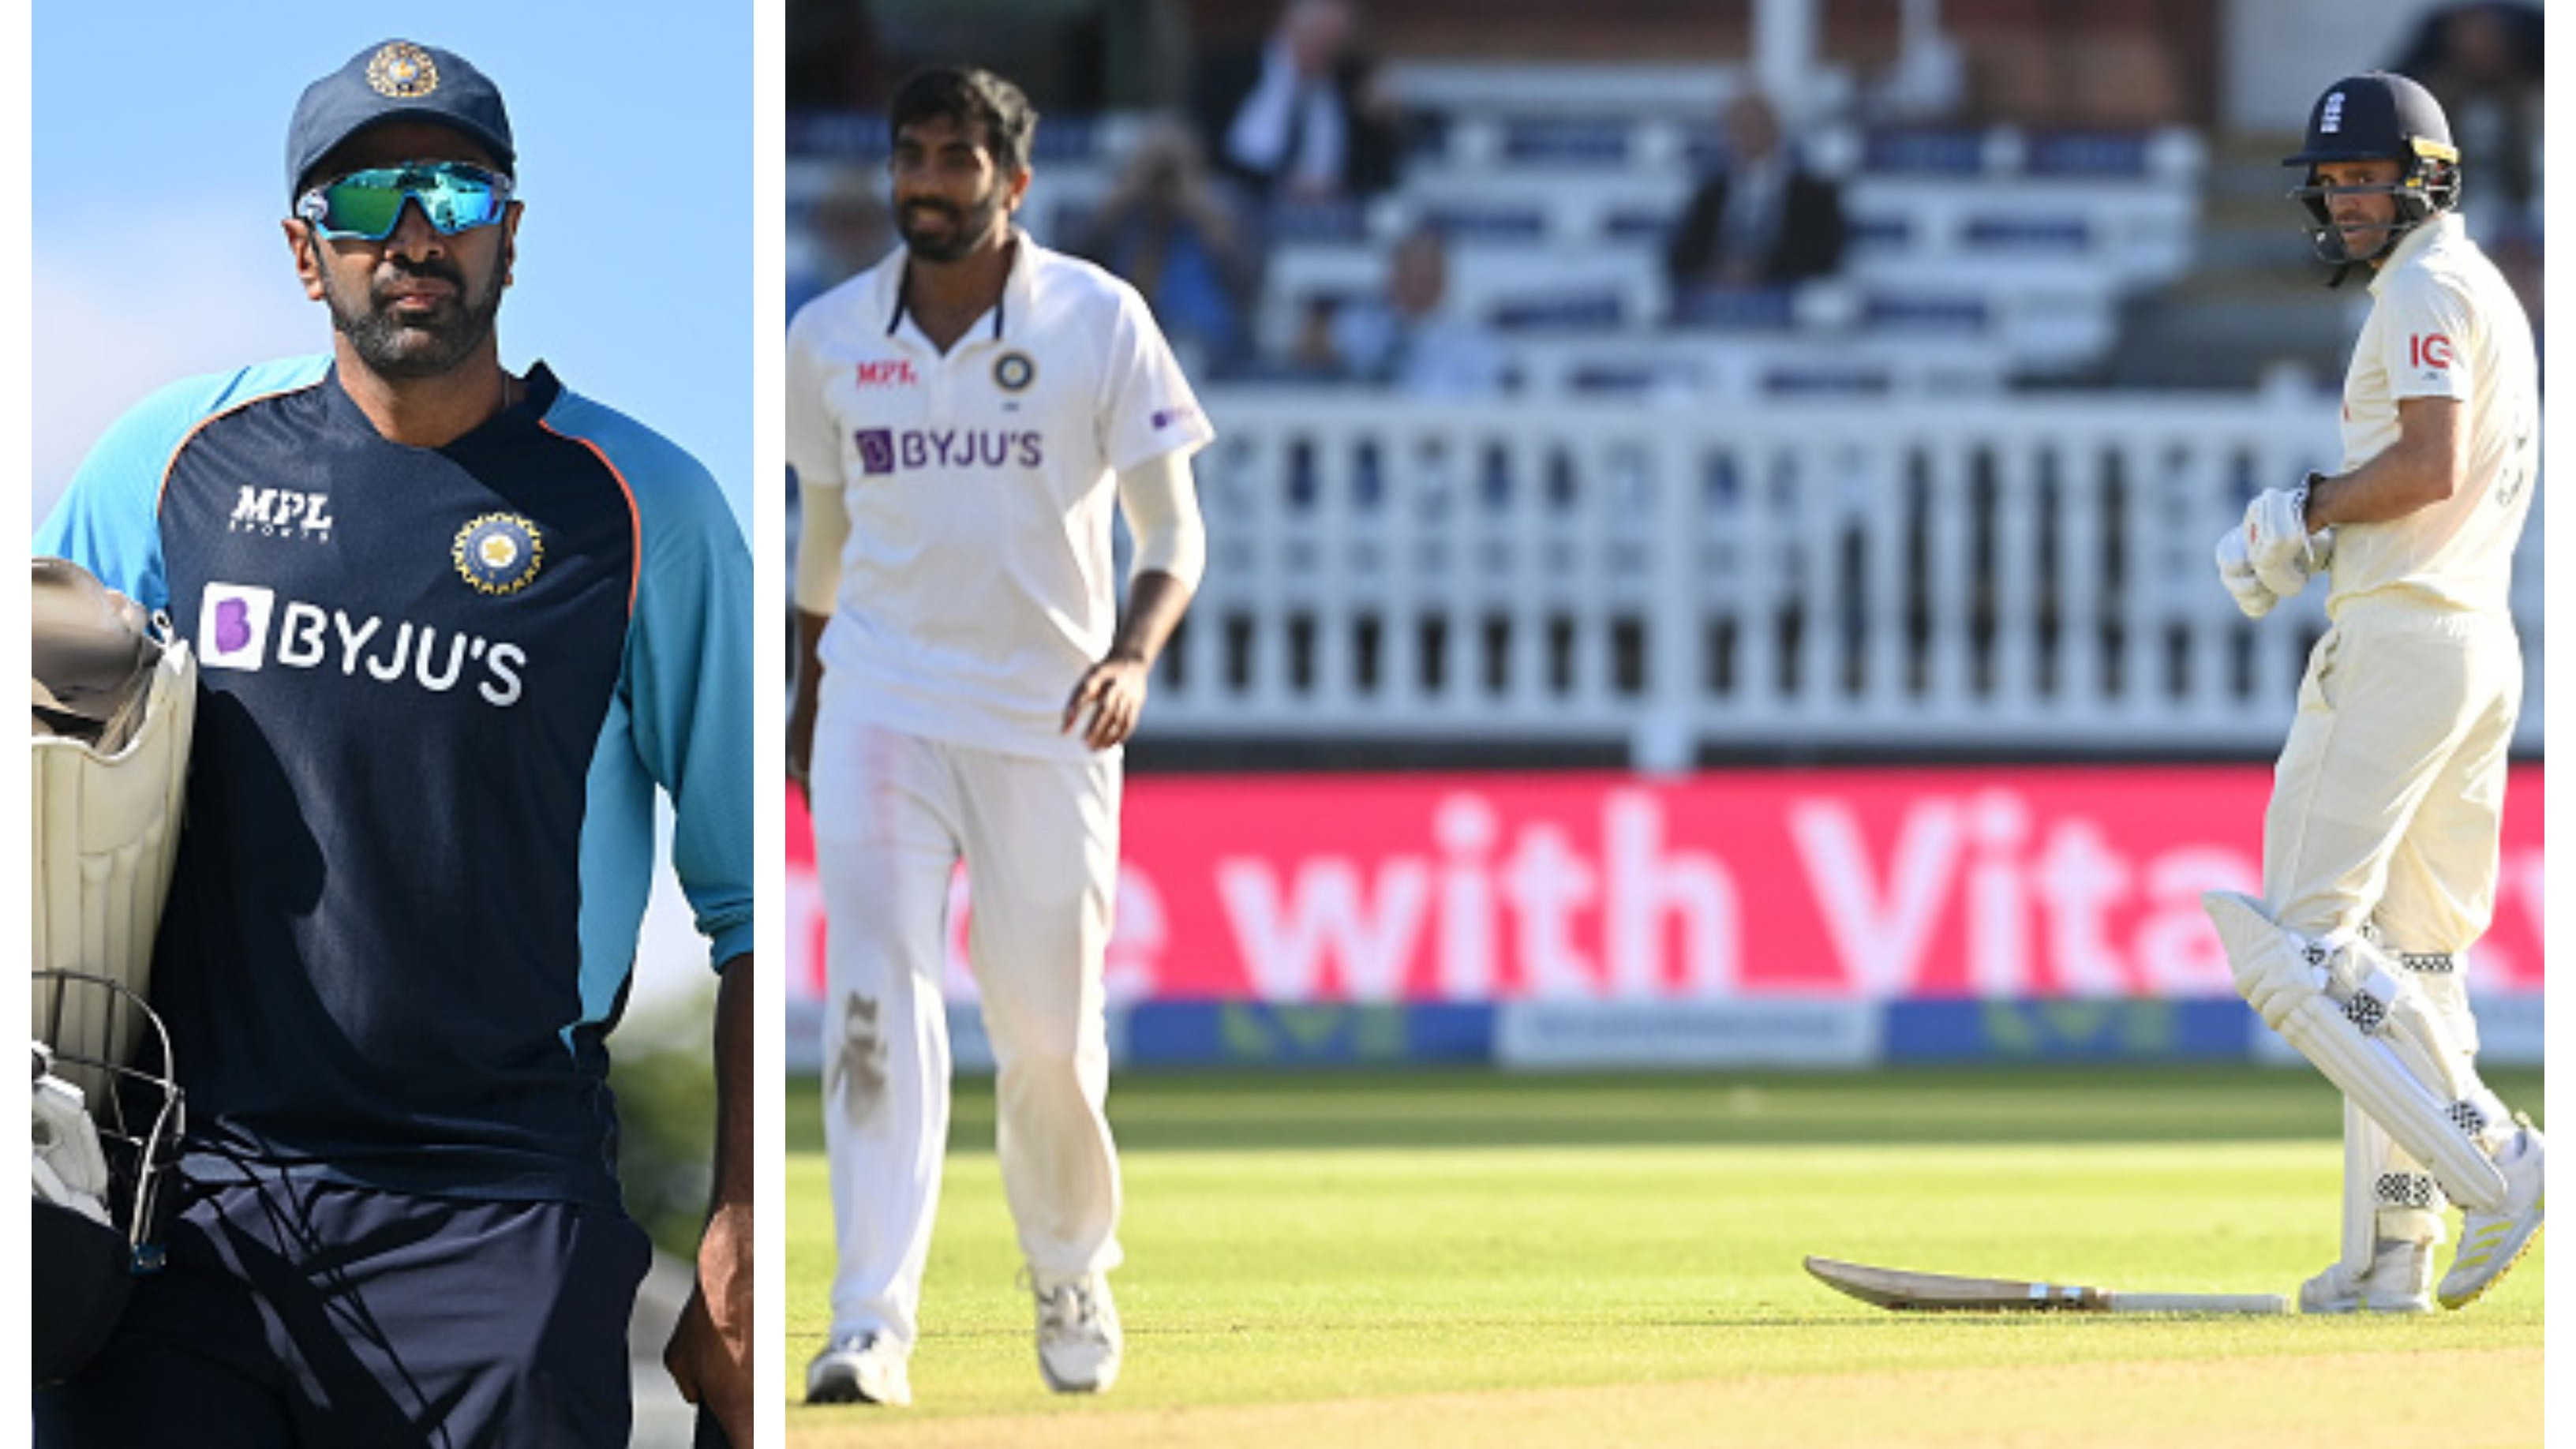 ENG v IND 2021: ‘Hey mate! Why are you bowling so fast?’, Ashwin surprised by Anderson’s statement during Bumrah’s over 